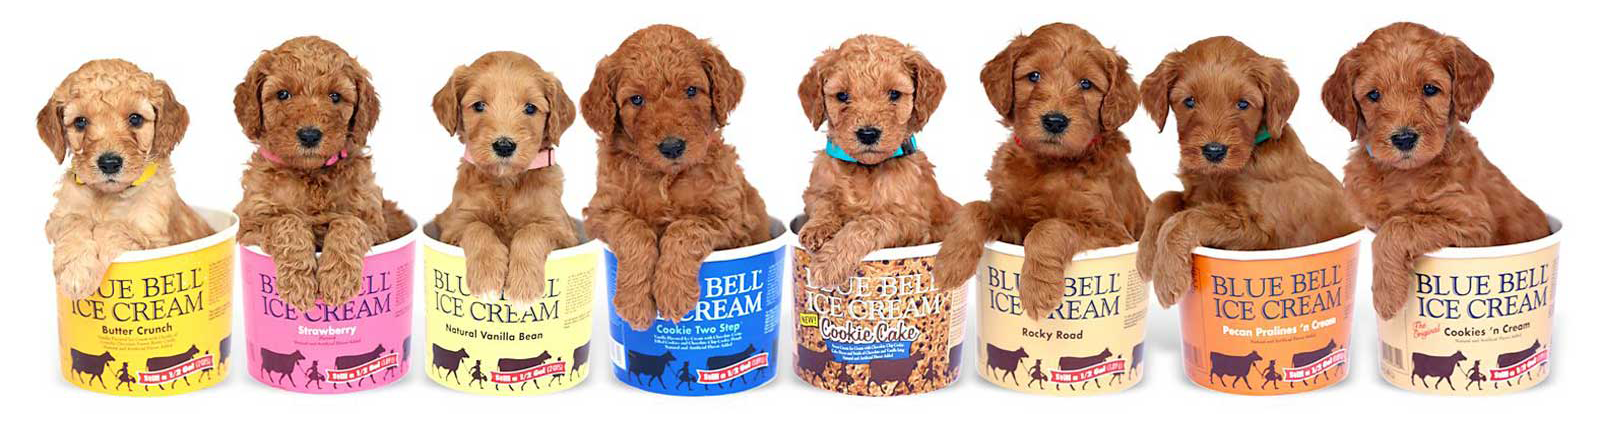 Life is Better with Doodles puppies sitting in blue bell ice cream containers